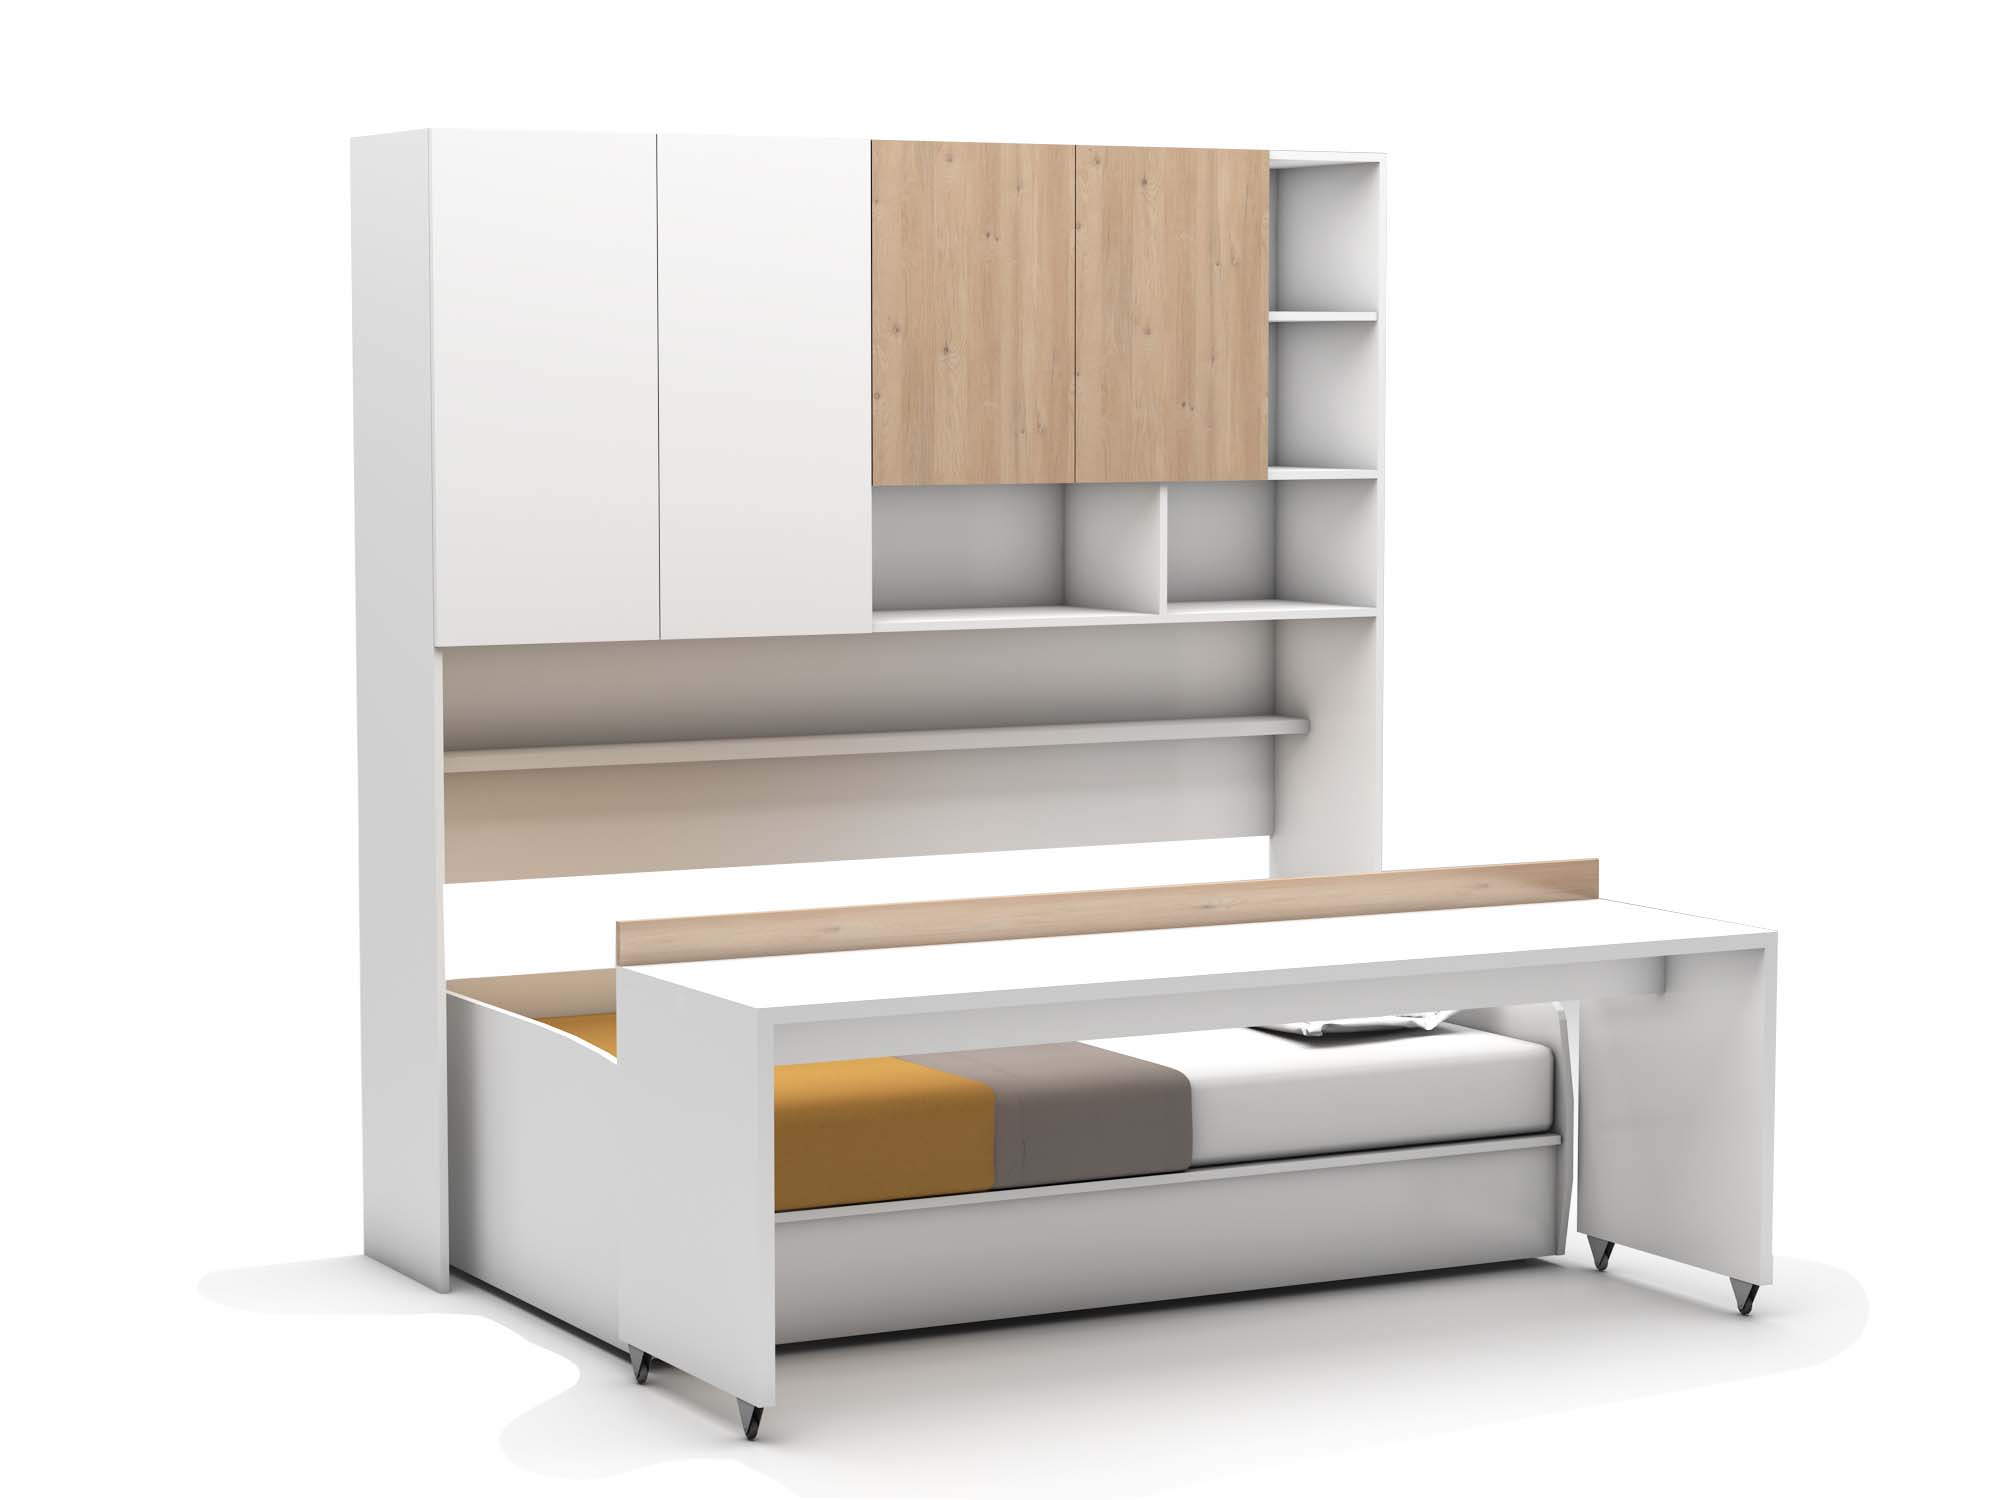 Wallbeds